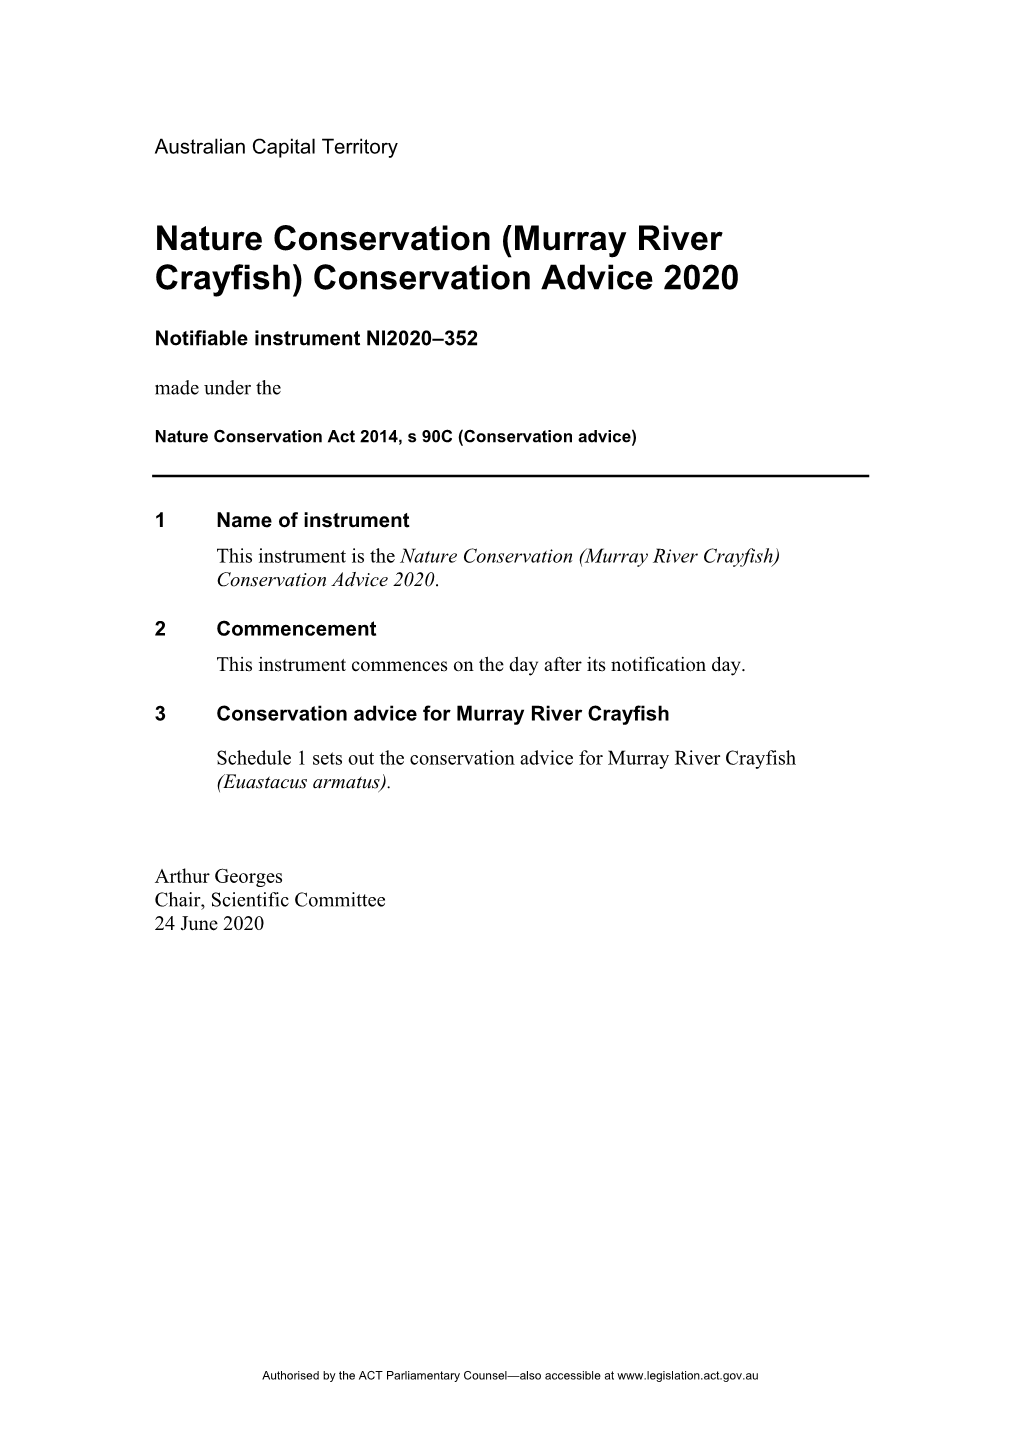 Nature Conservation (Murray River Crayfish) Conservation Advice 2020